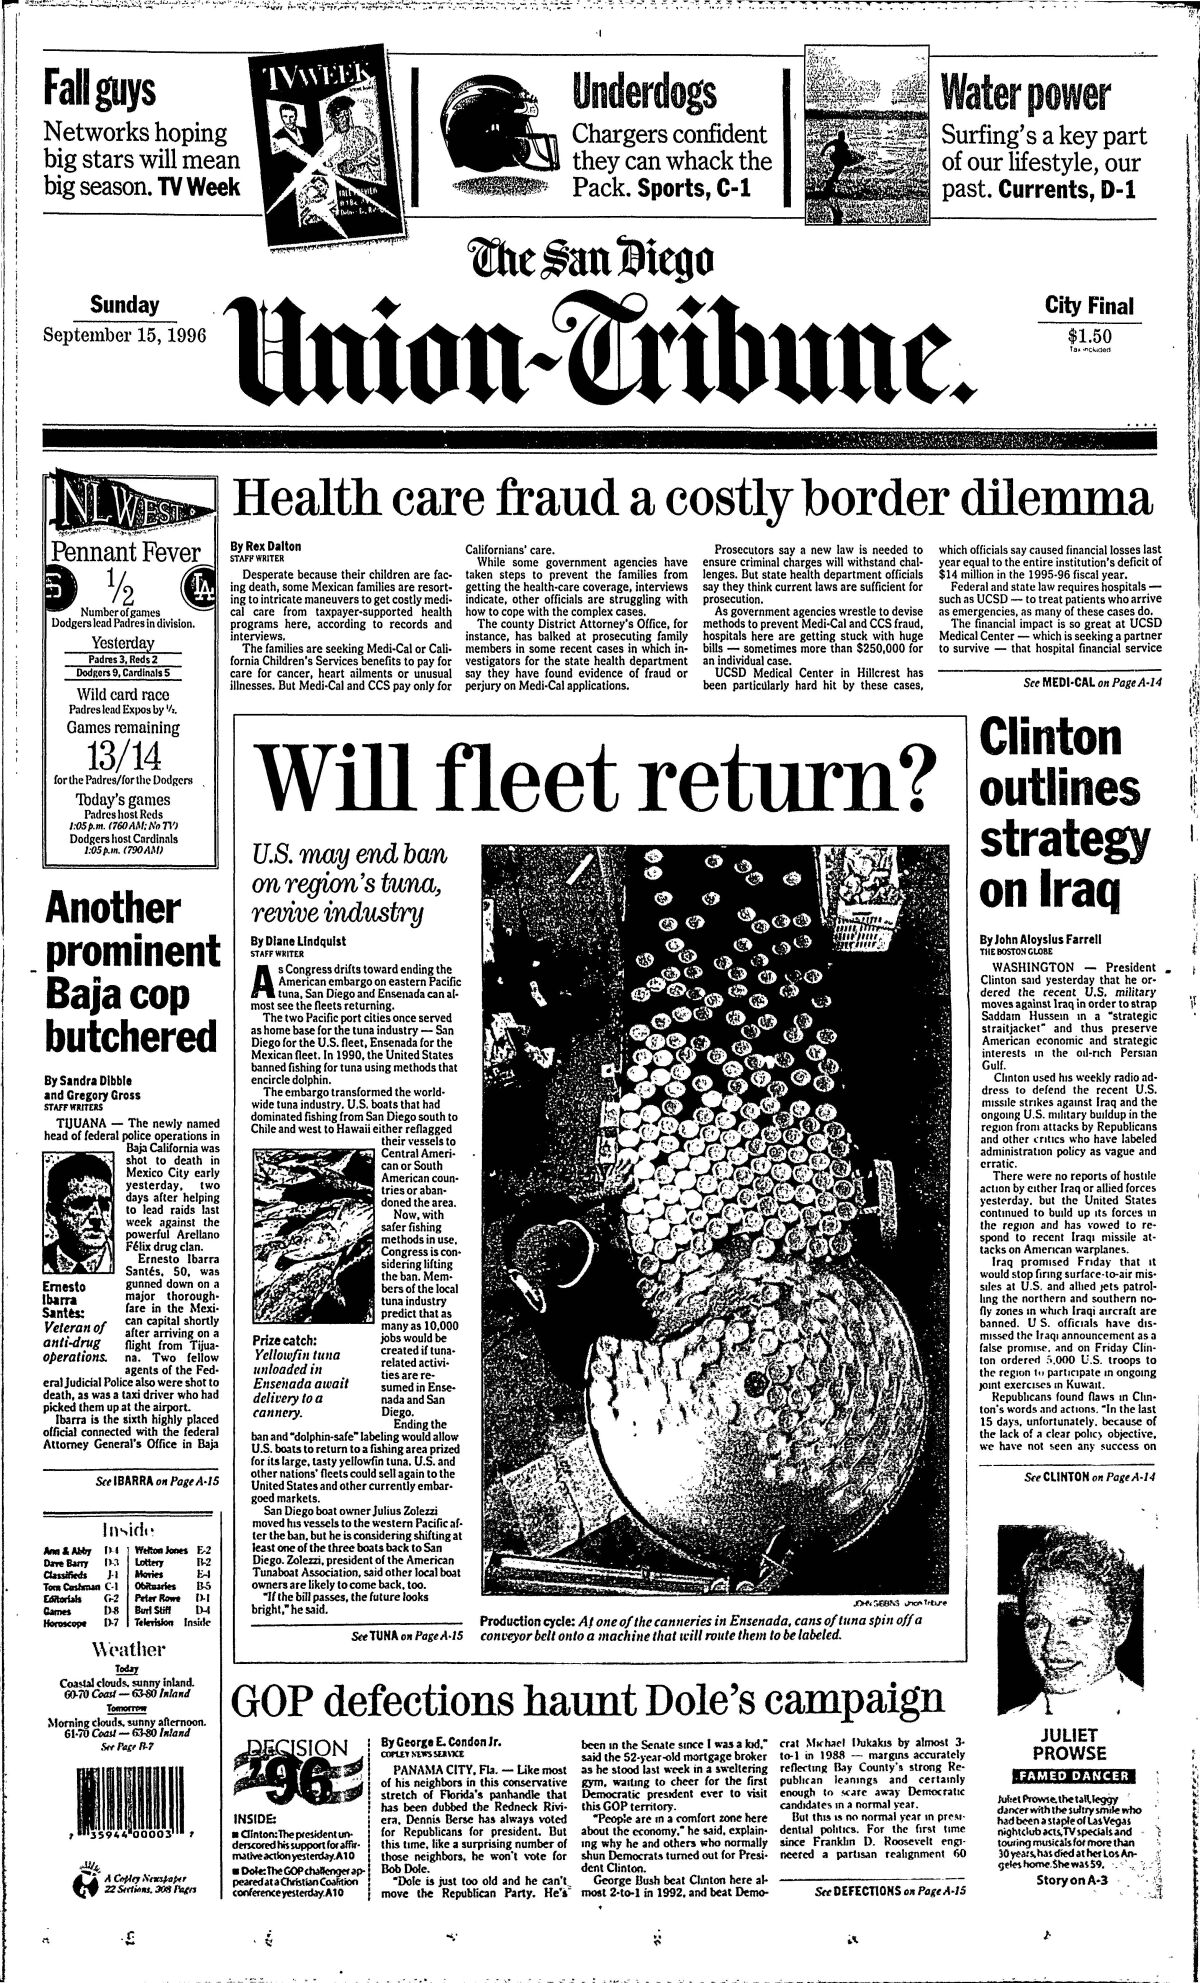 Front page of The San Diego Union-Tribune, Sunday, Sept. 15, 1996.